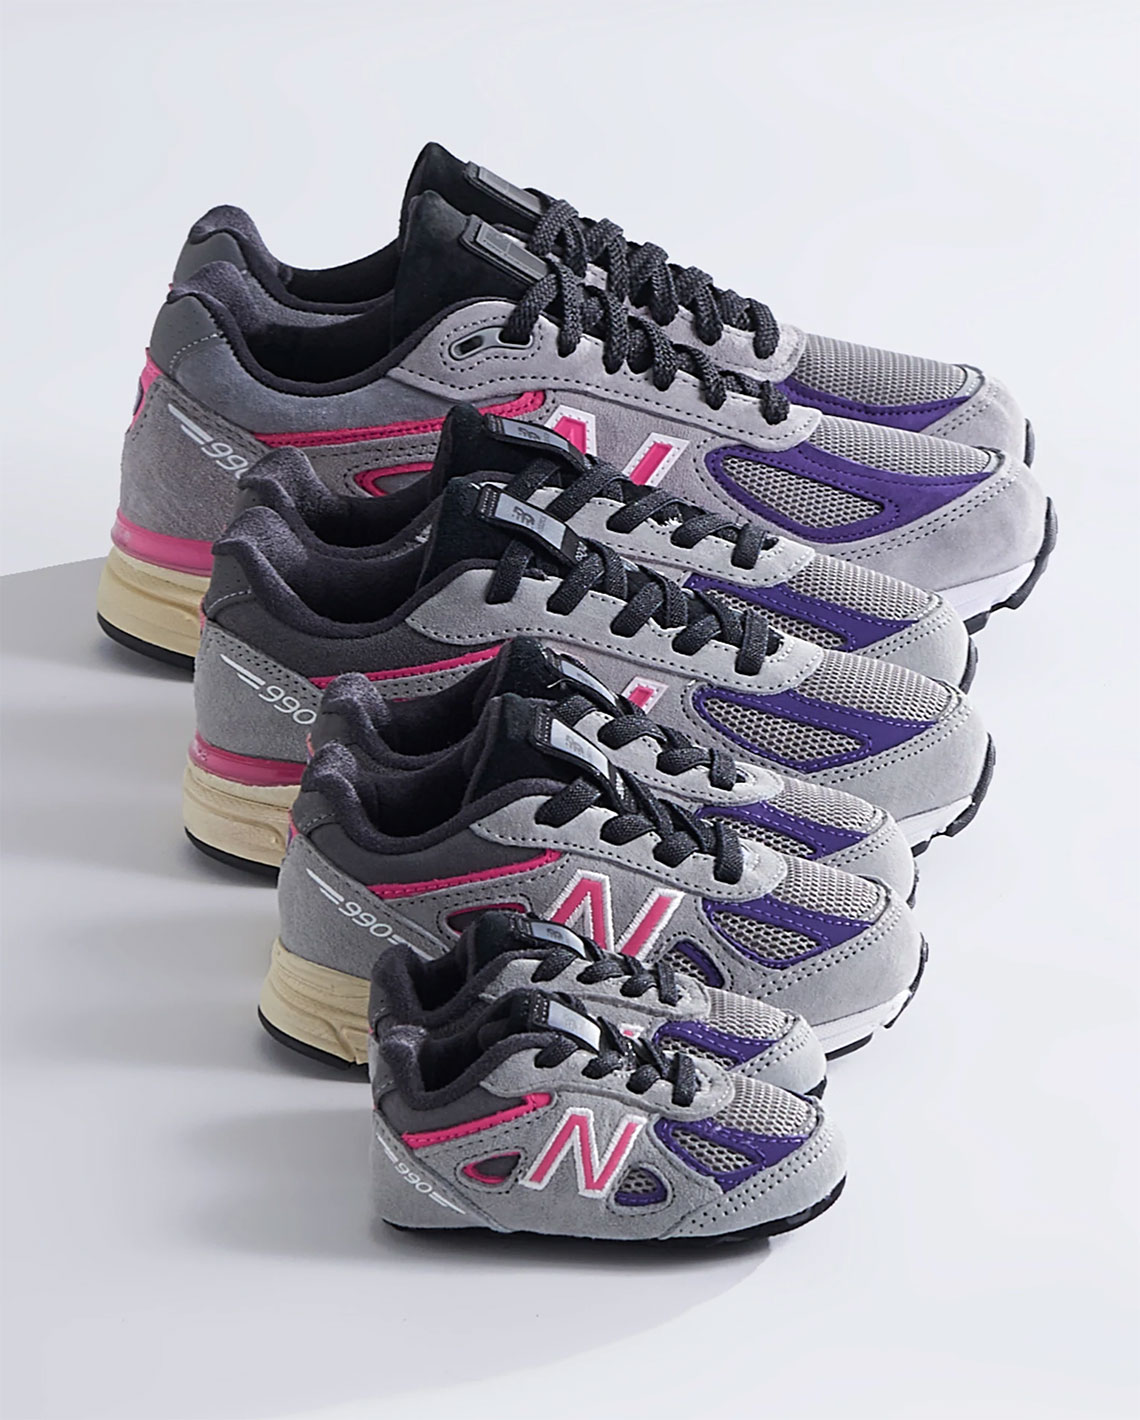 KITH New Balance 990v4 United Arrows & Sons Release Date 